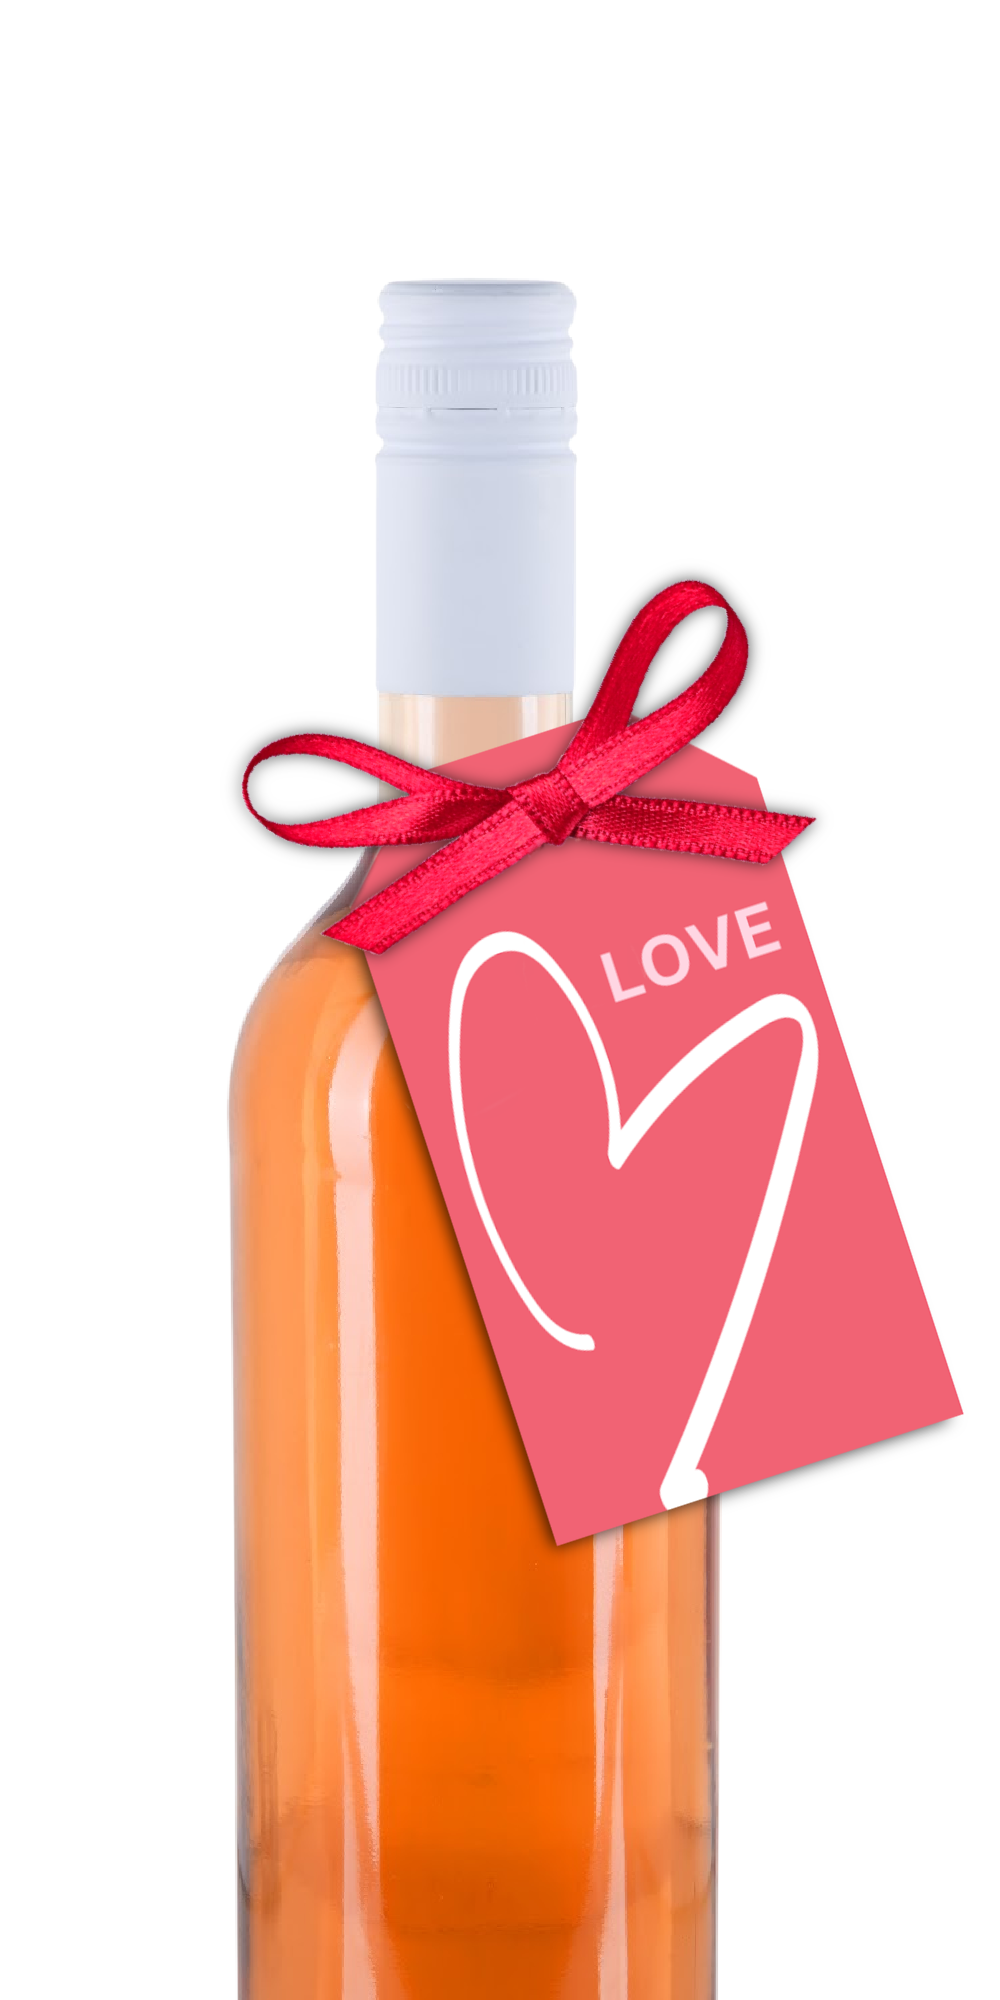 Pink "Love" wine bottle gift tag.